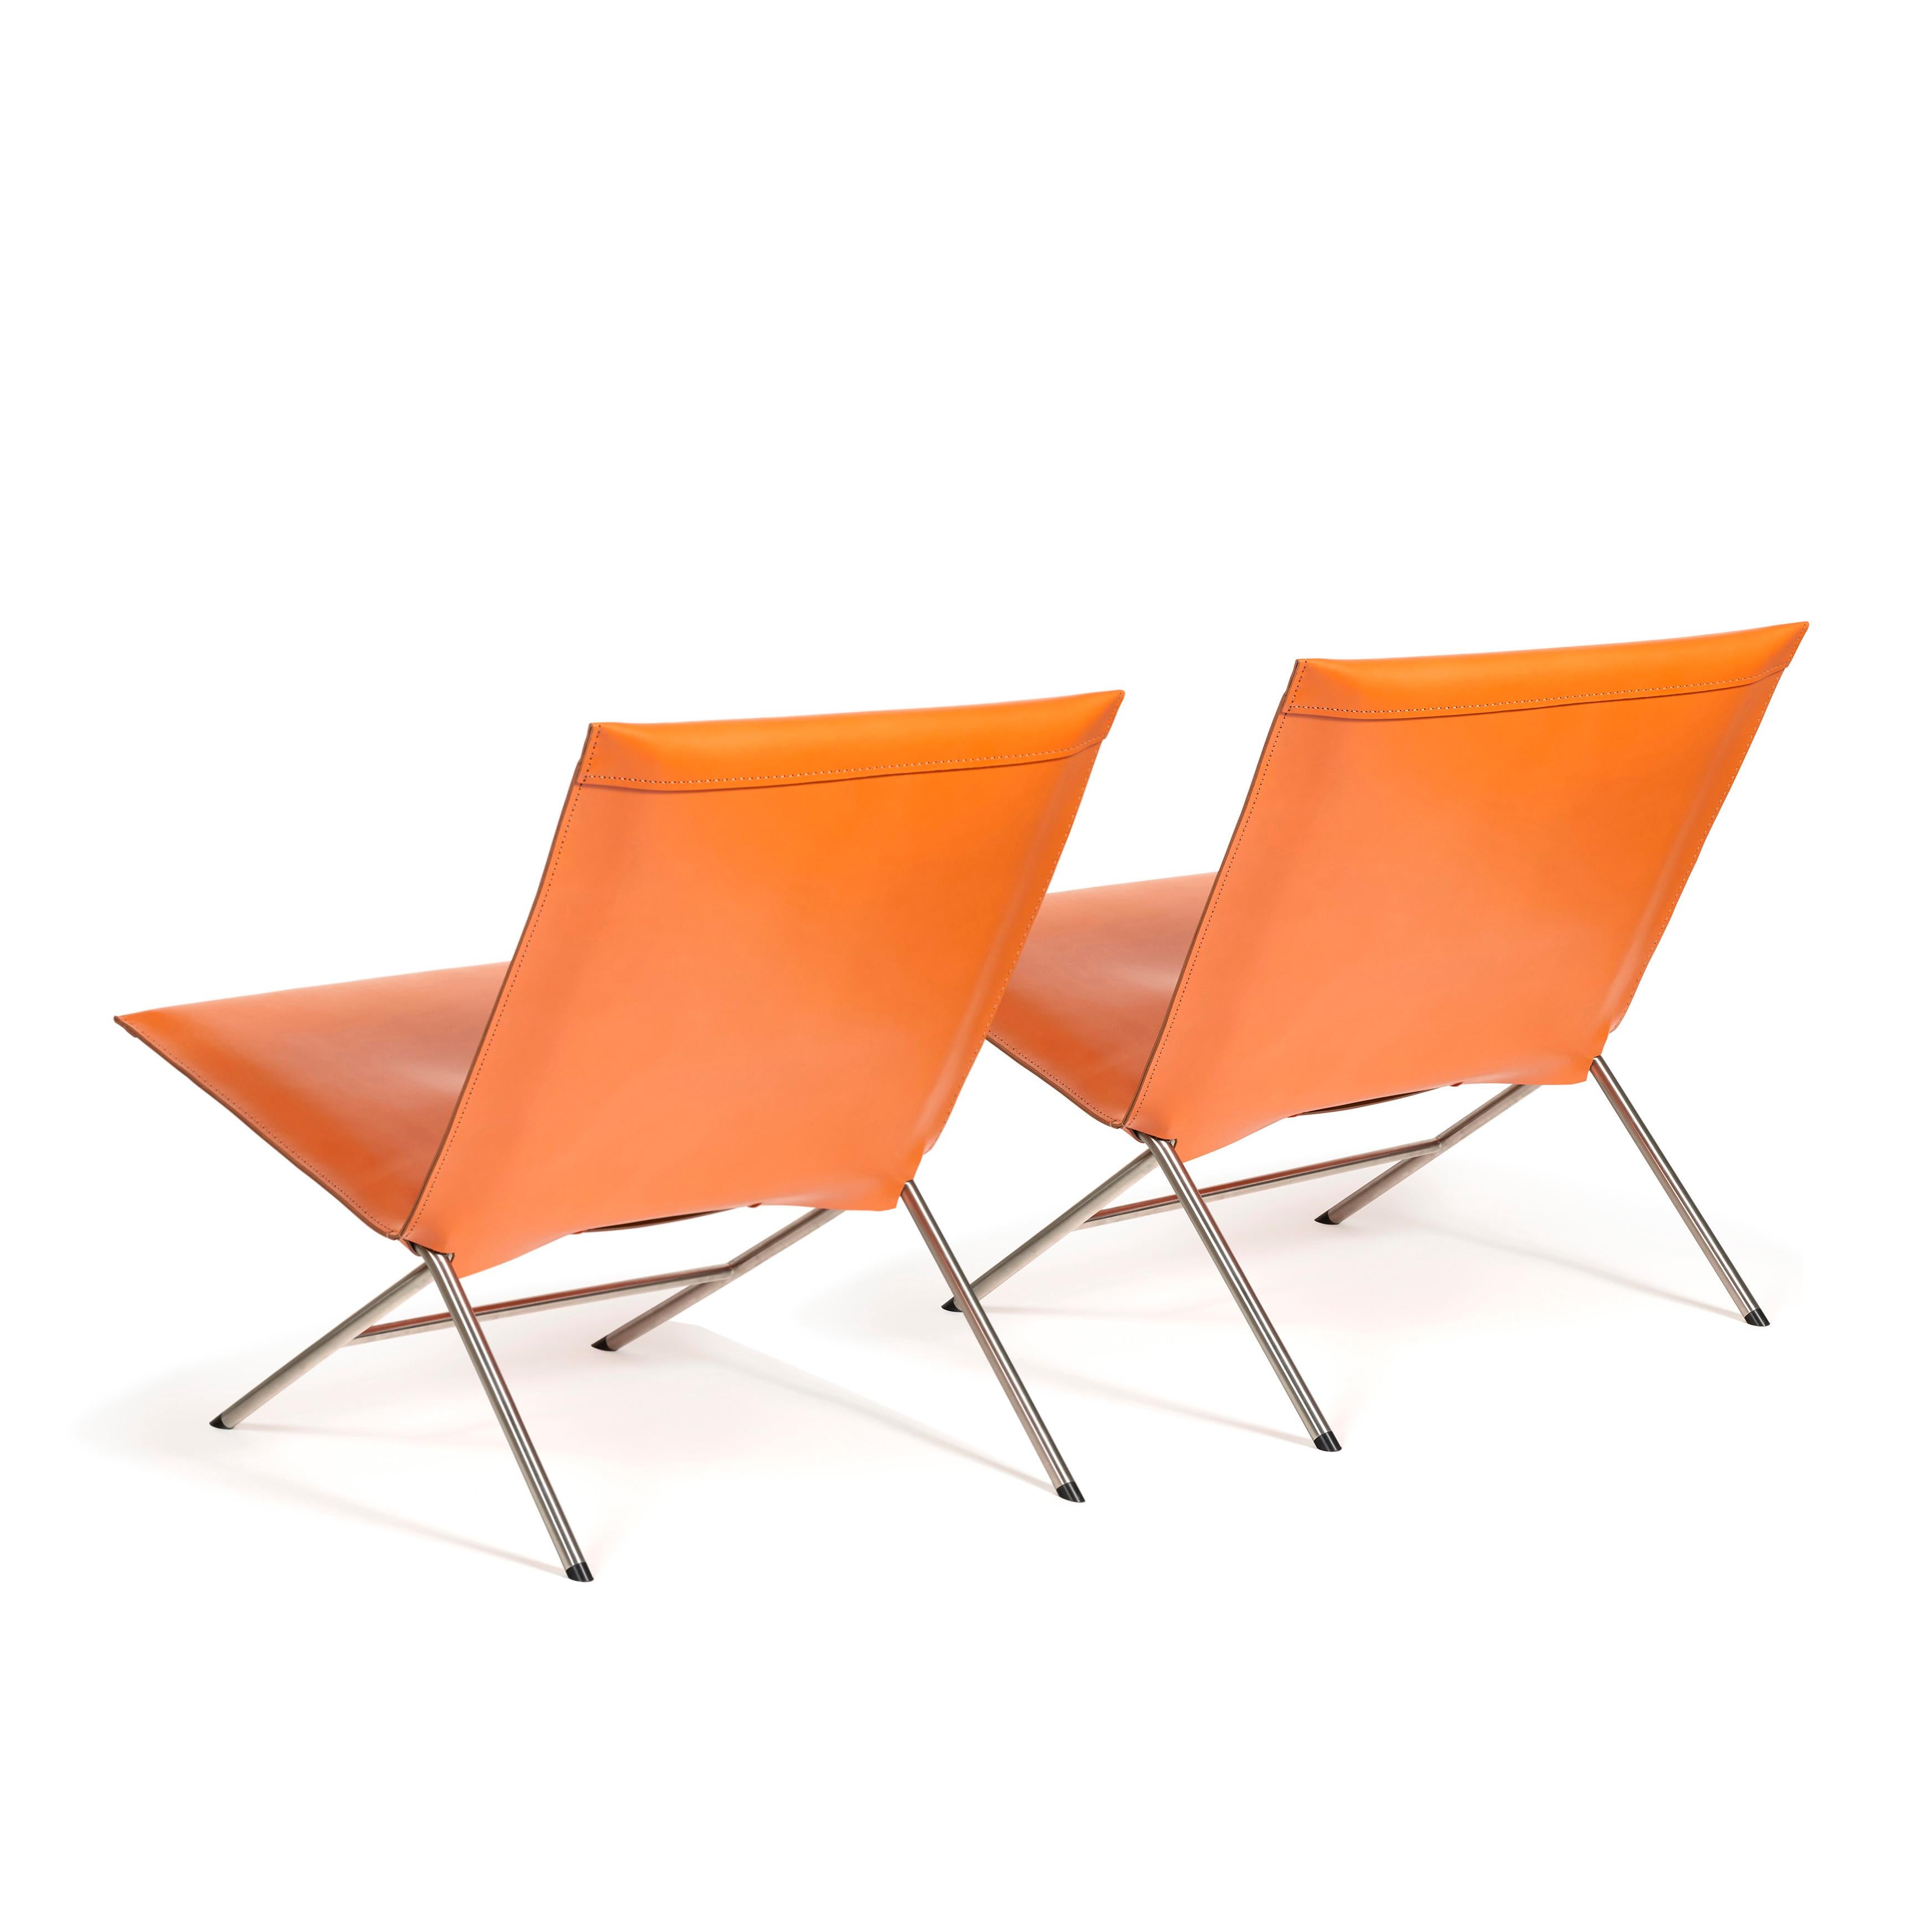 Gioia Meller-Marcovicz.

Recline

A stainless steel and Arancio leather foldable pair of lounge chairs.
Each with a rectangular back and seat covered with dyed leather on a stainless folding structure issuing four cylindrical feet.
Made in